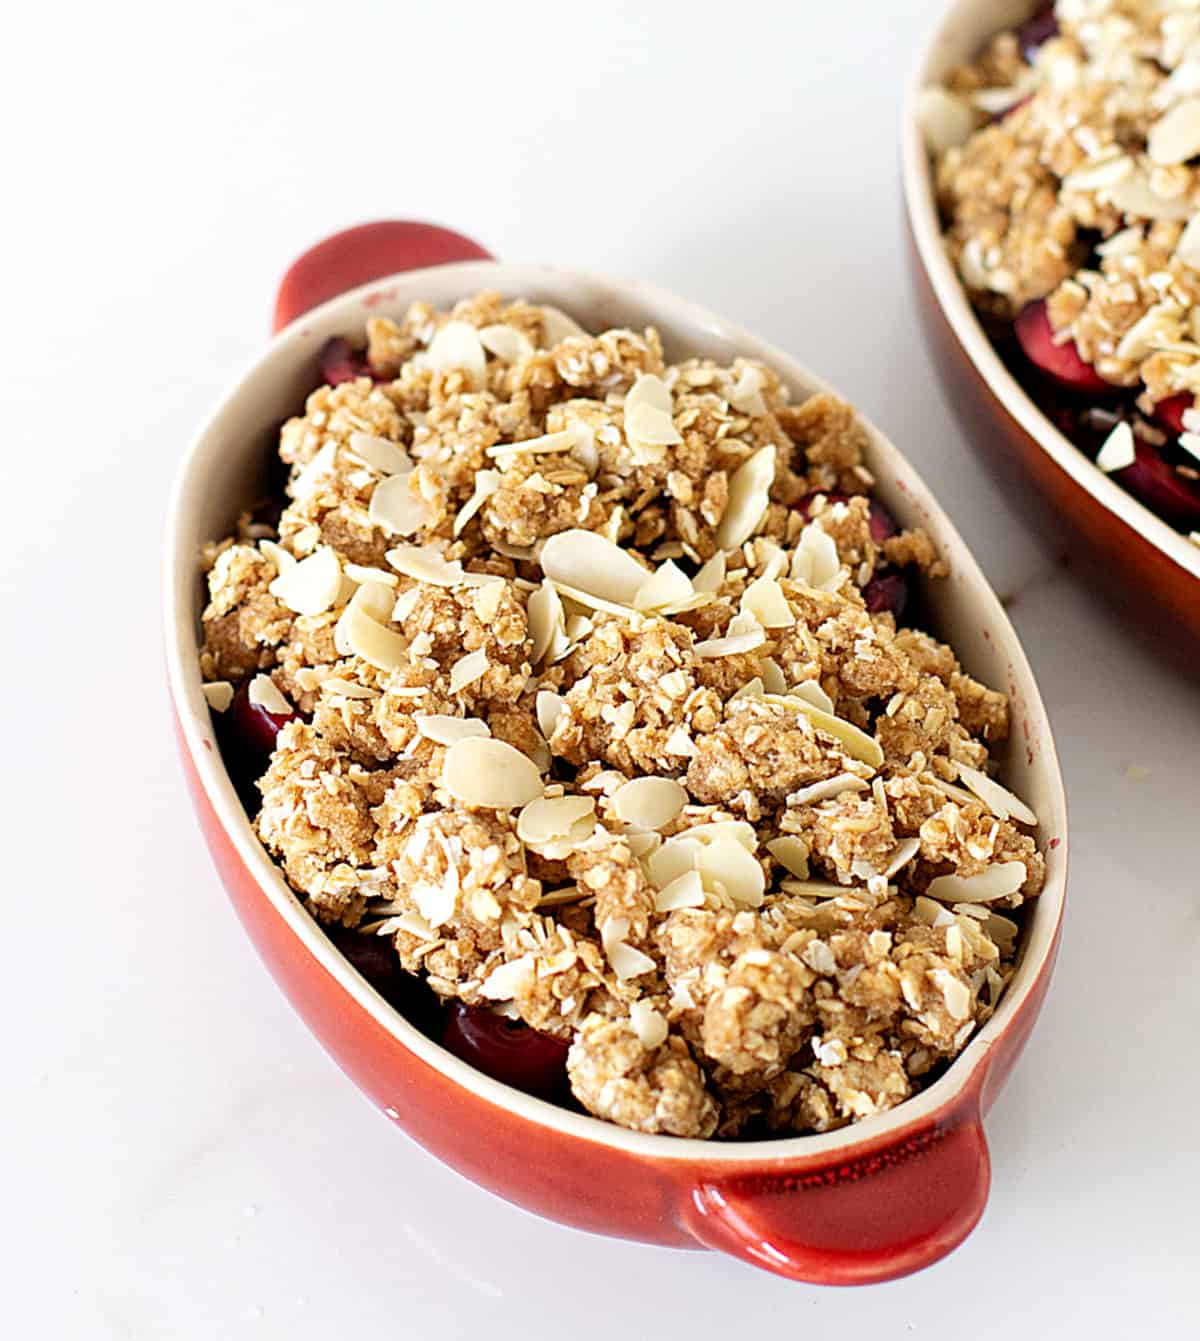 Unbaked cherry oat crumble in red oval dish on white table.